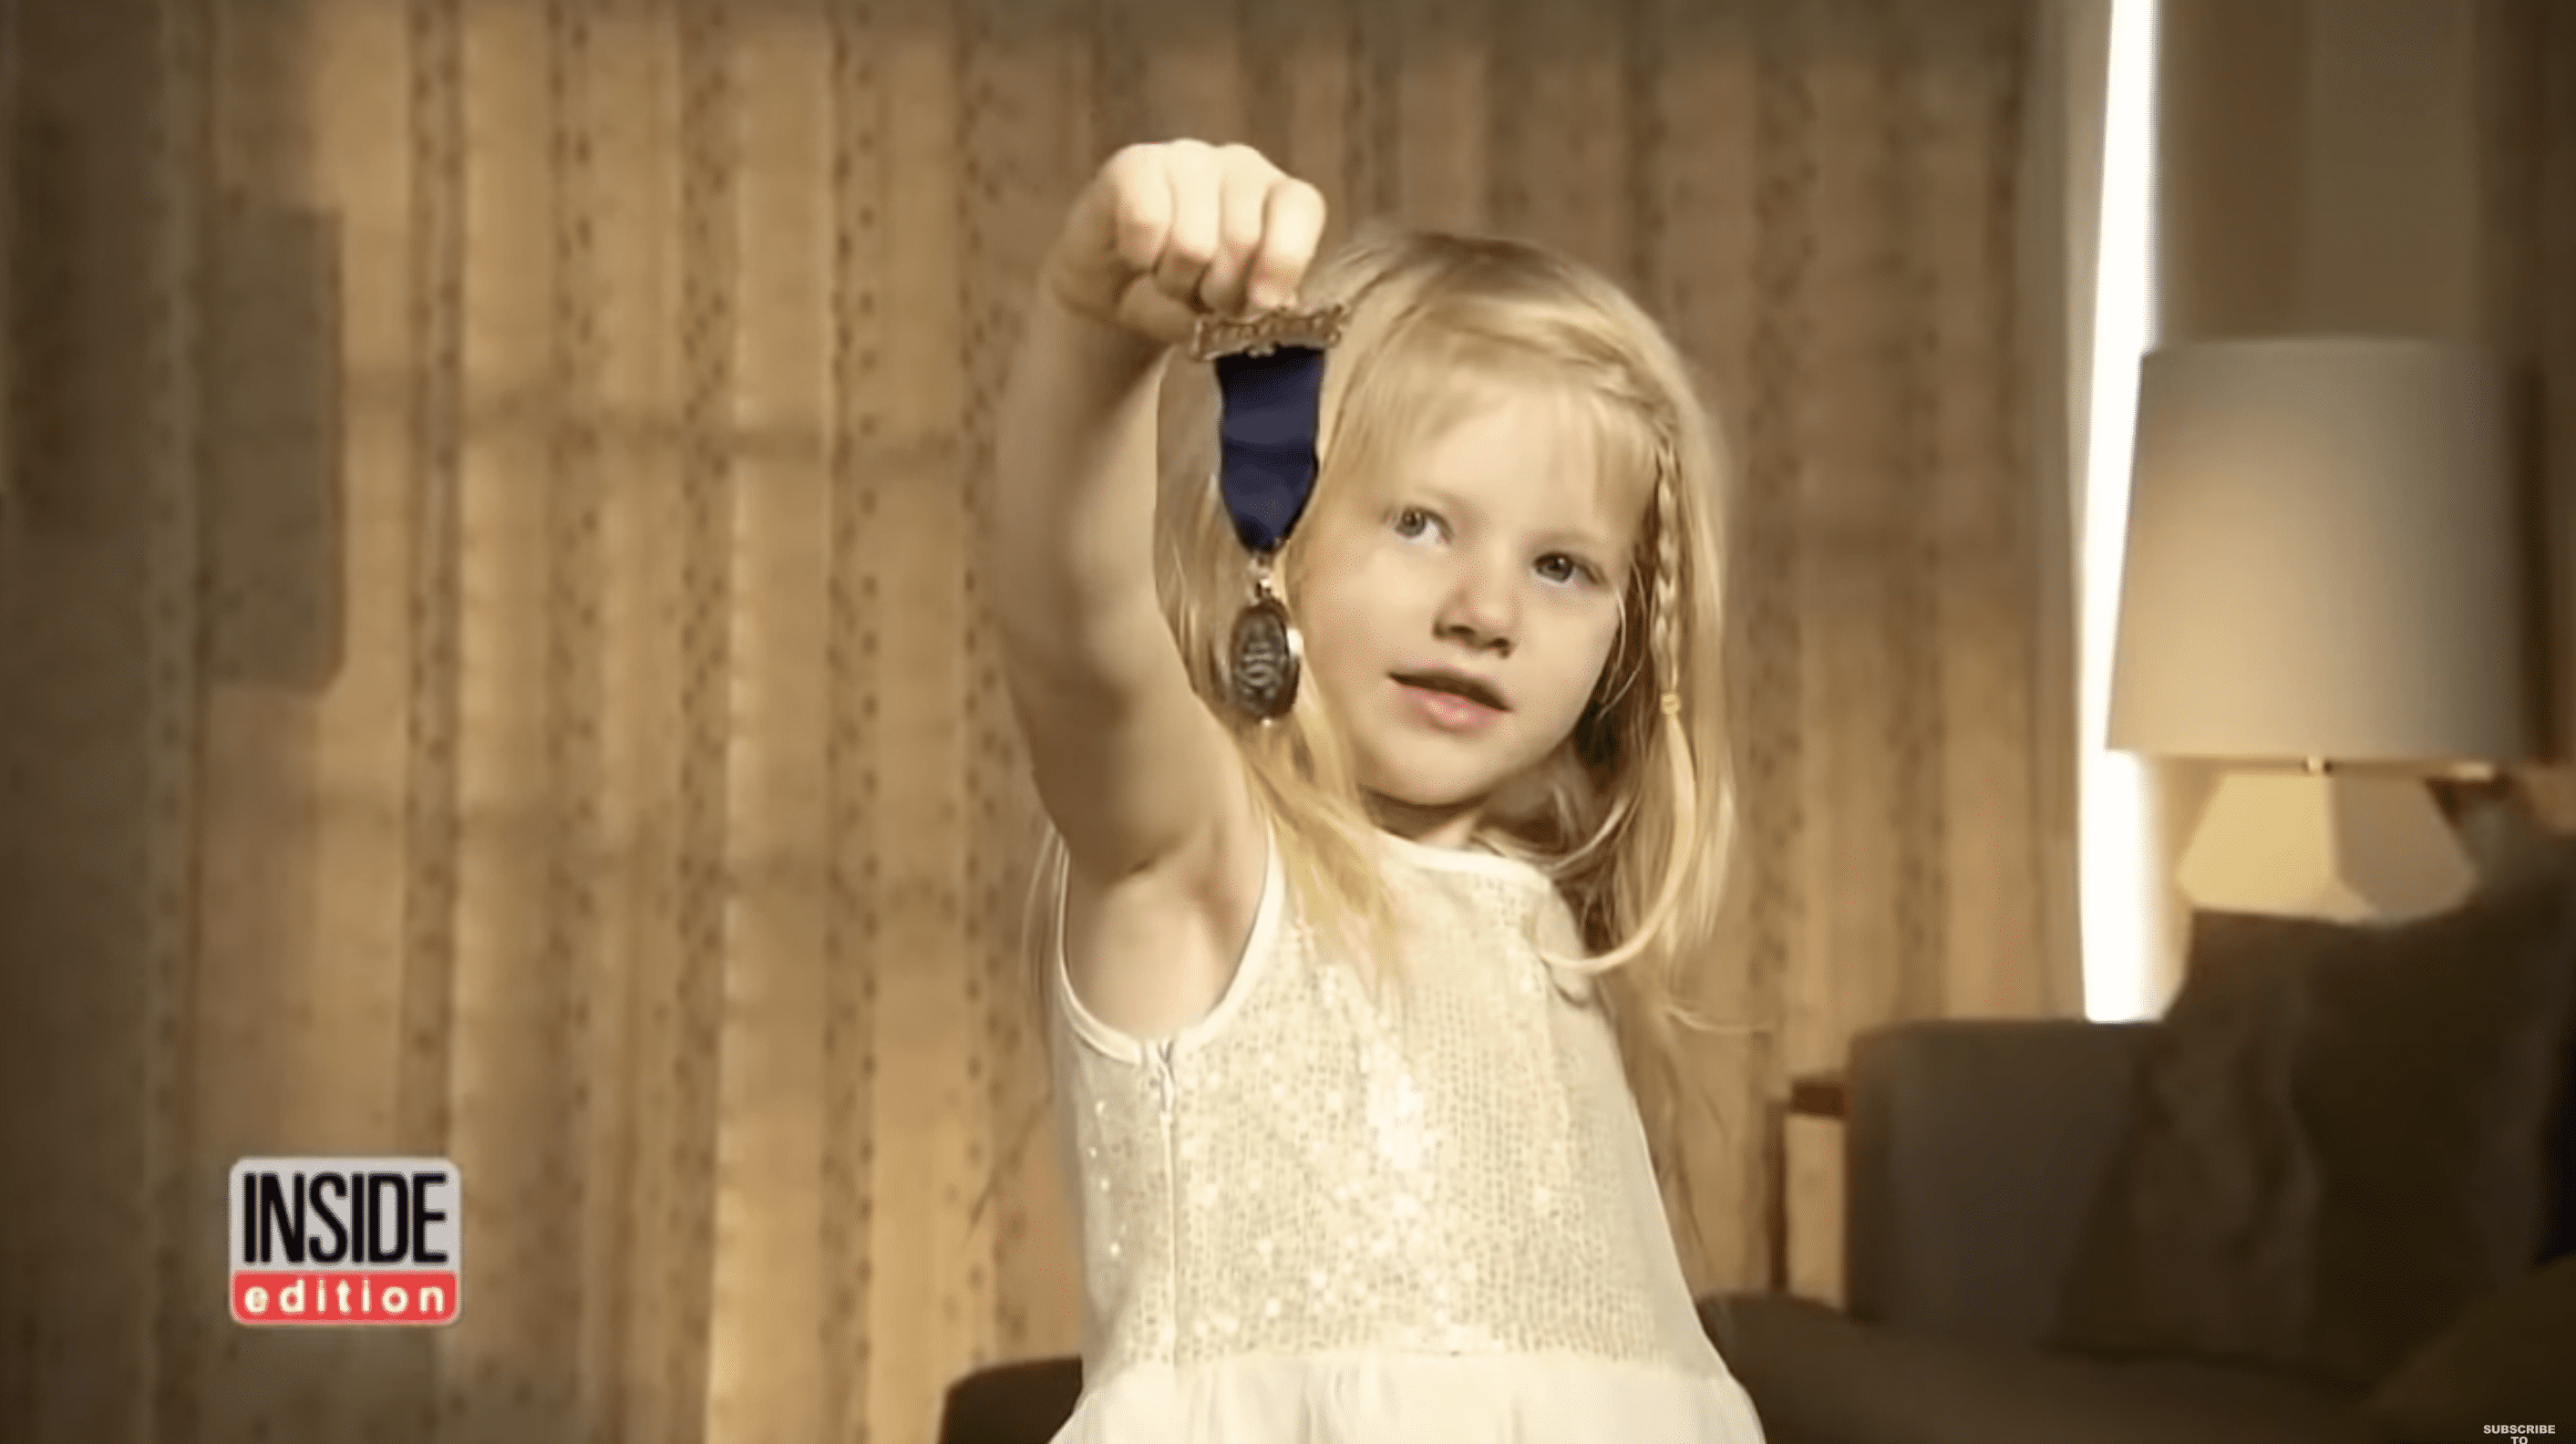 Lexi showing her Medal of Bravery awarded by the Governor-General. | Photo: YouTube.com/Inside Edition